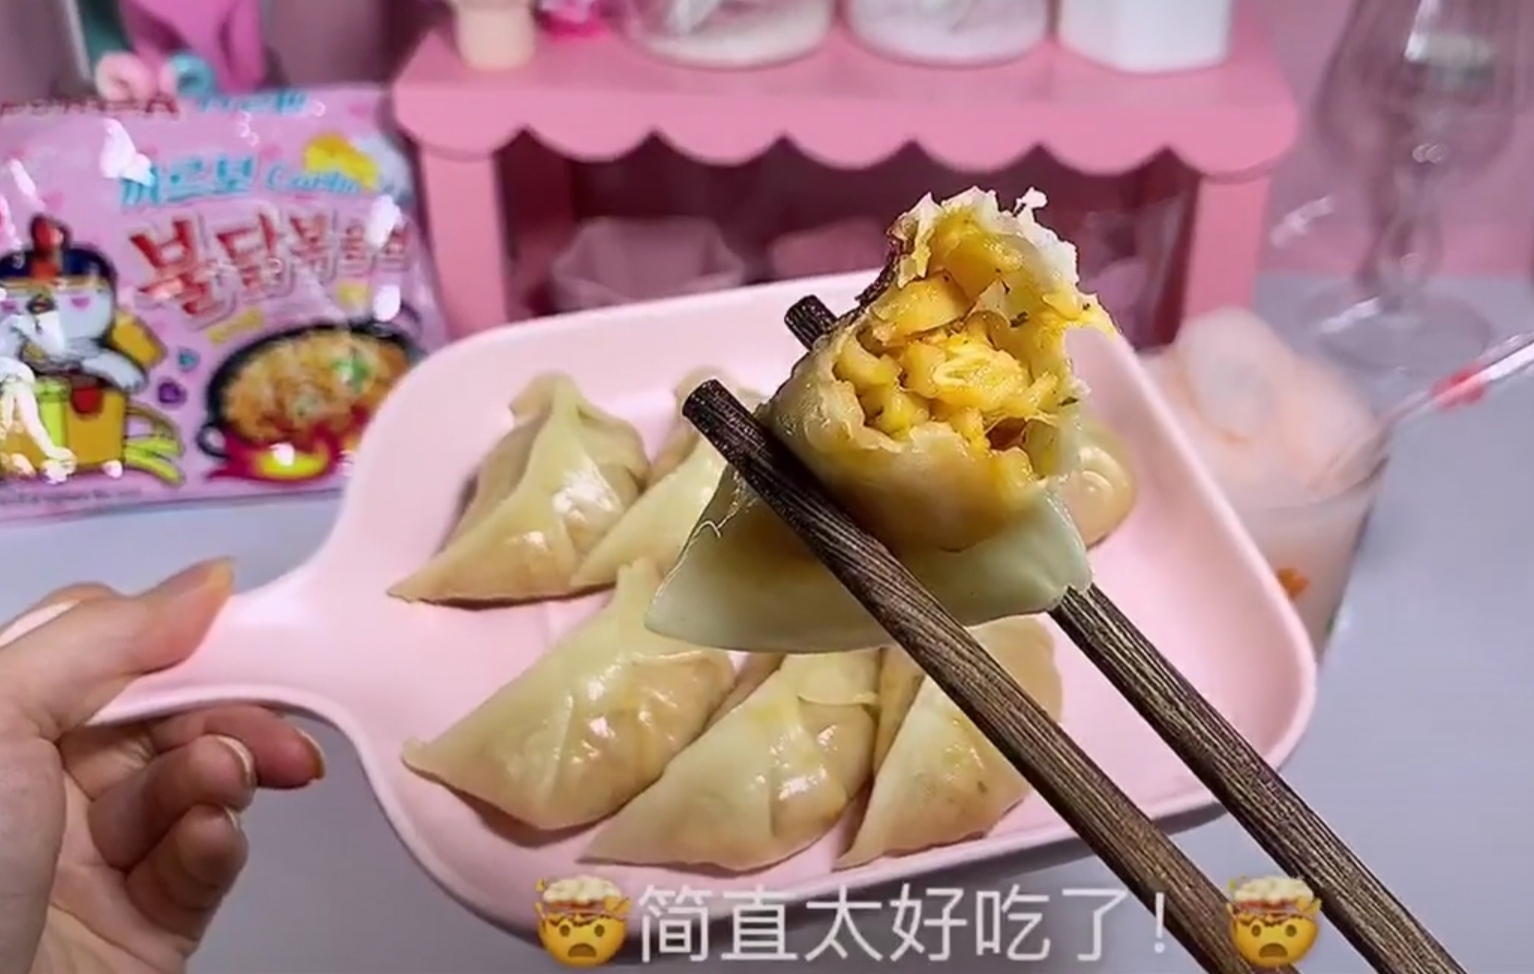 
Turkey face Zhi person the practice of dumpling, how to do delicious